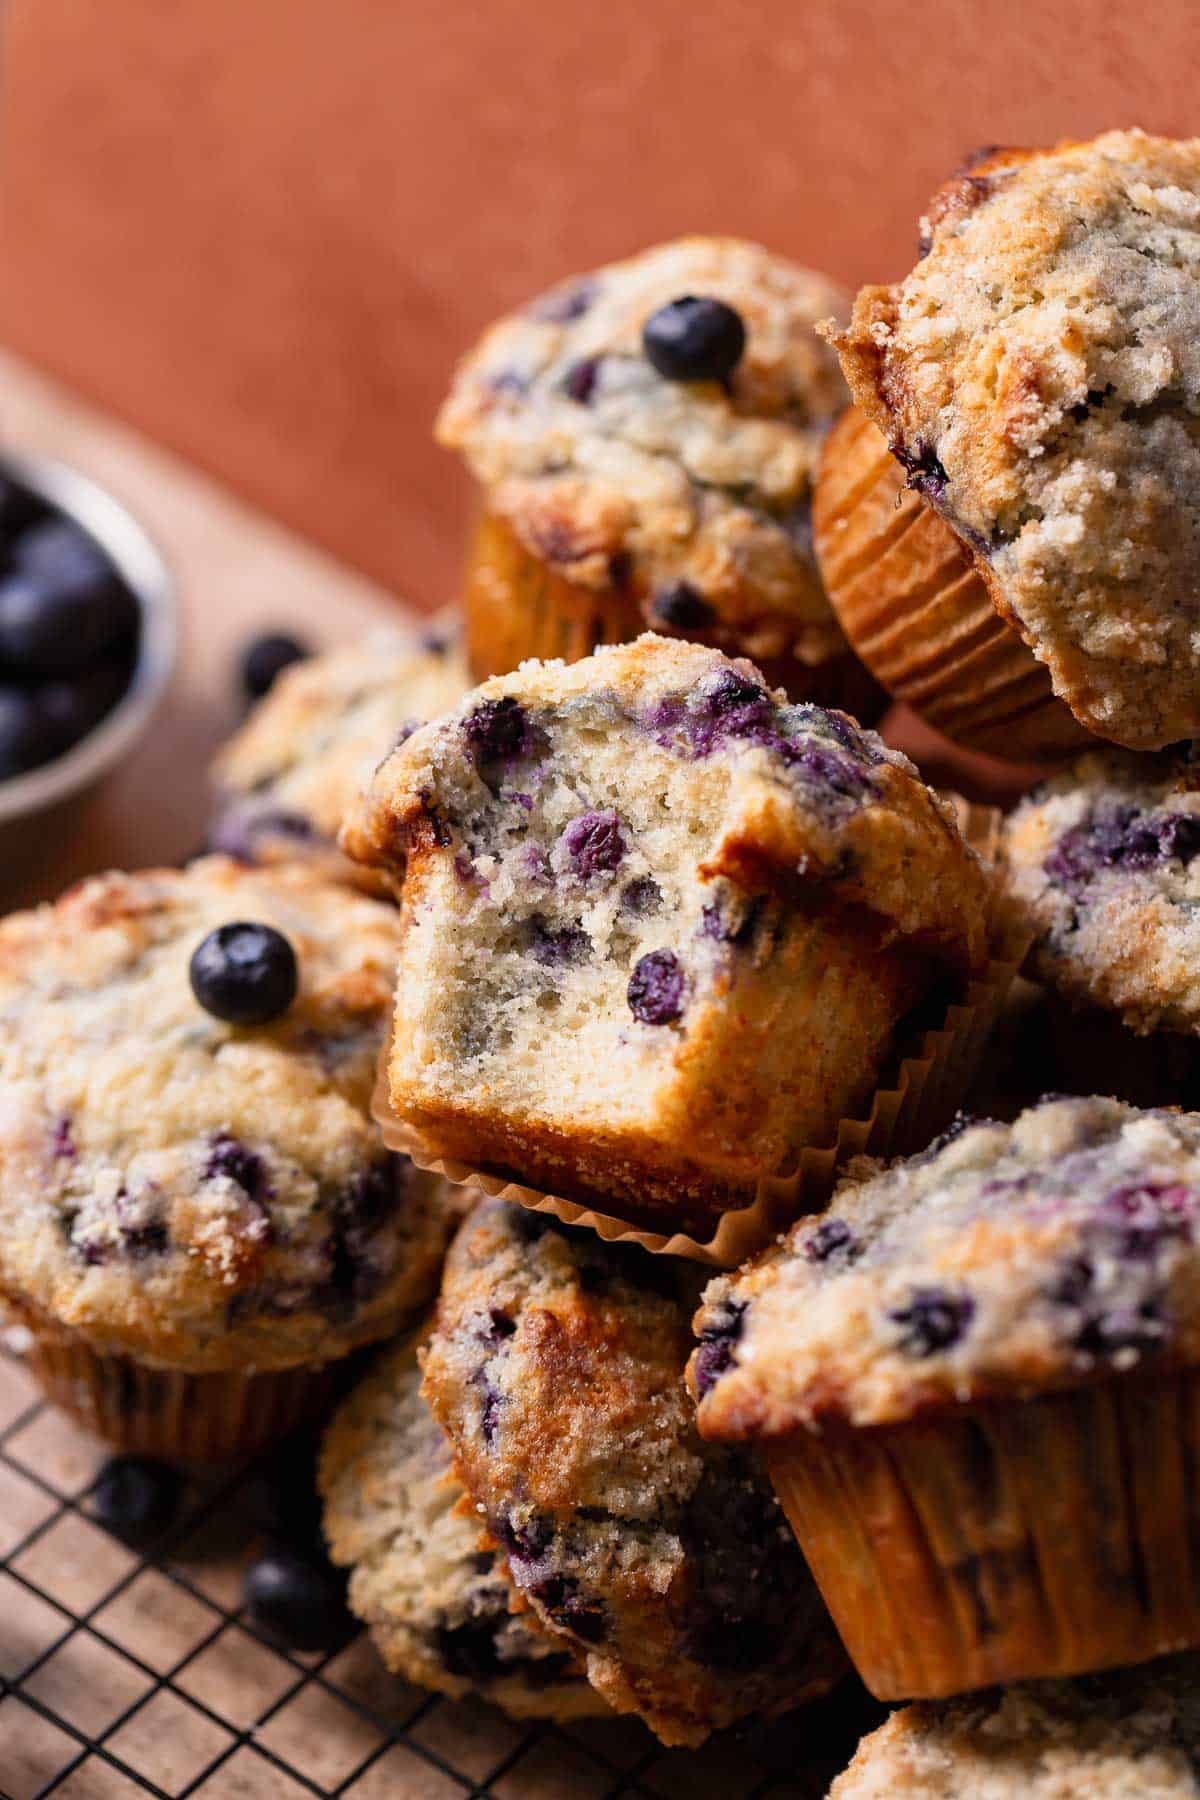 A blueberry muffin with a bite taken out of it to show the moist and fluffy texture.